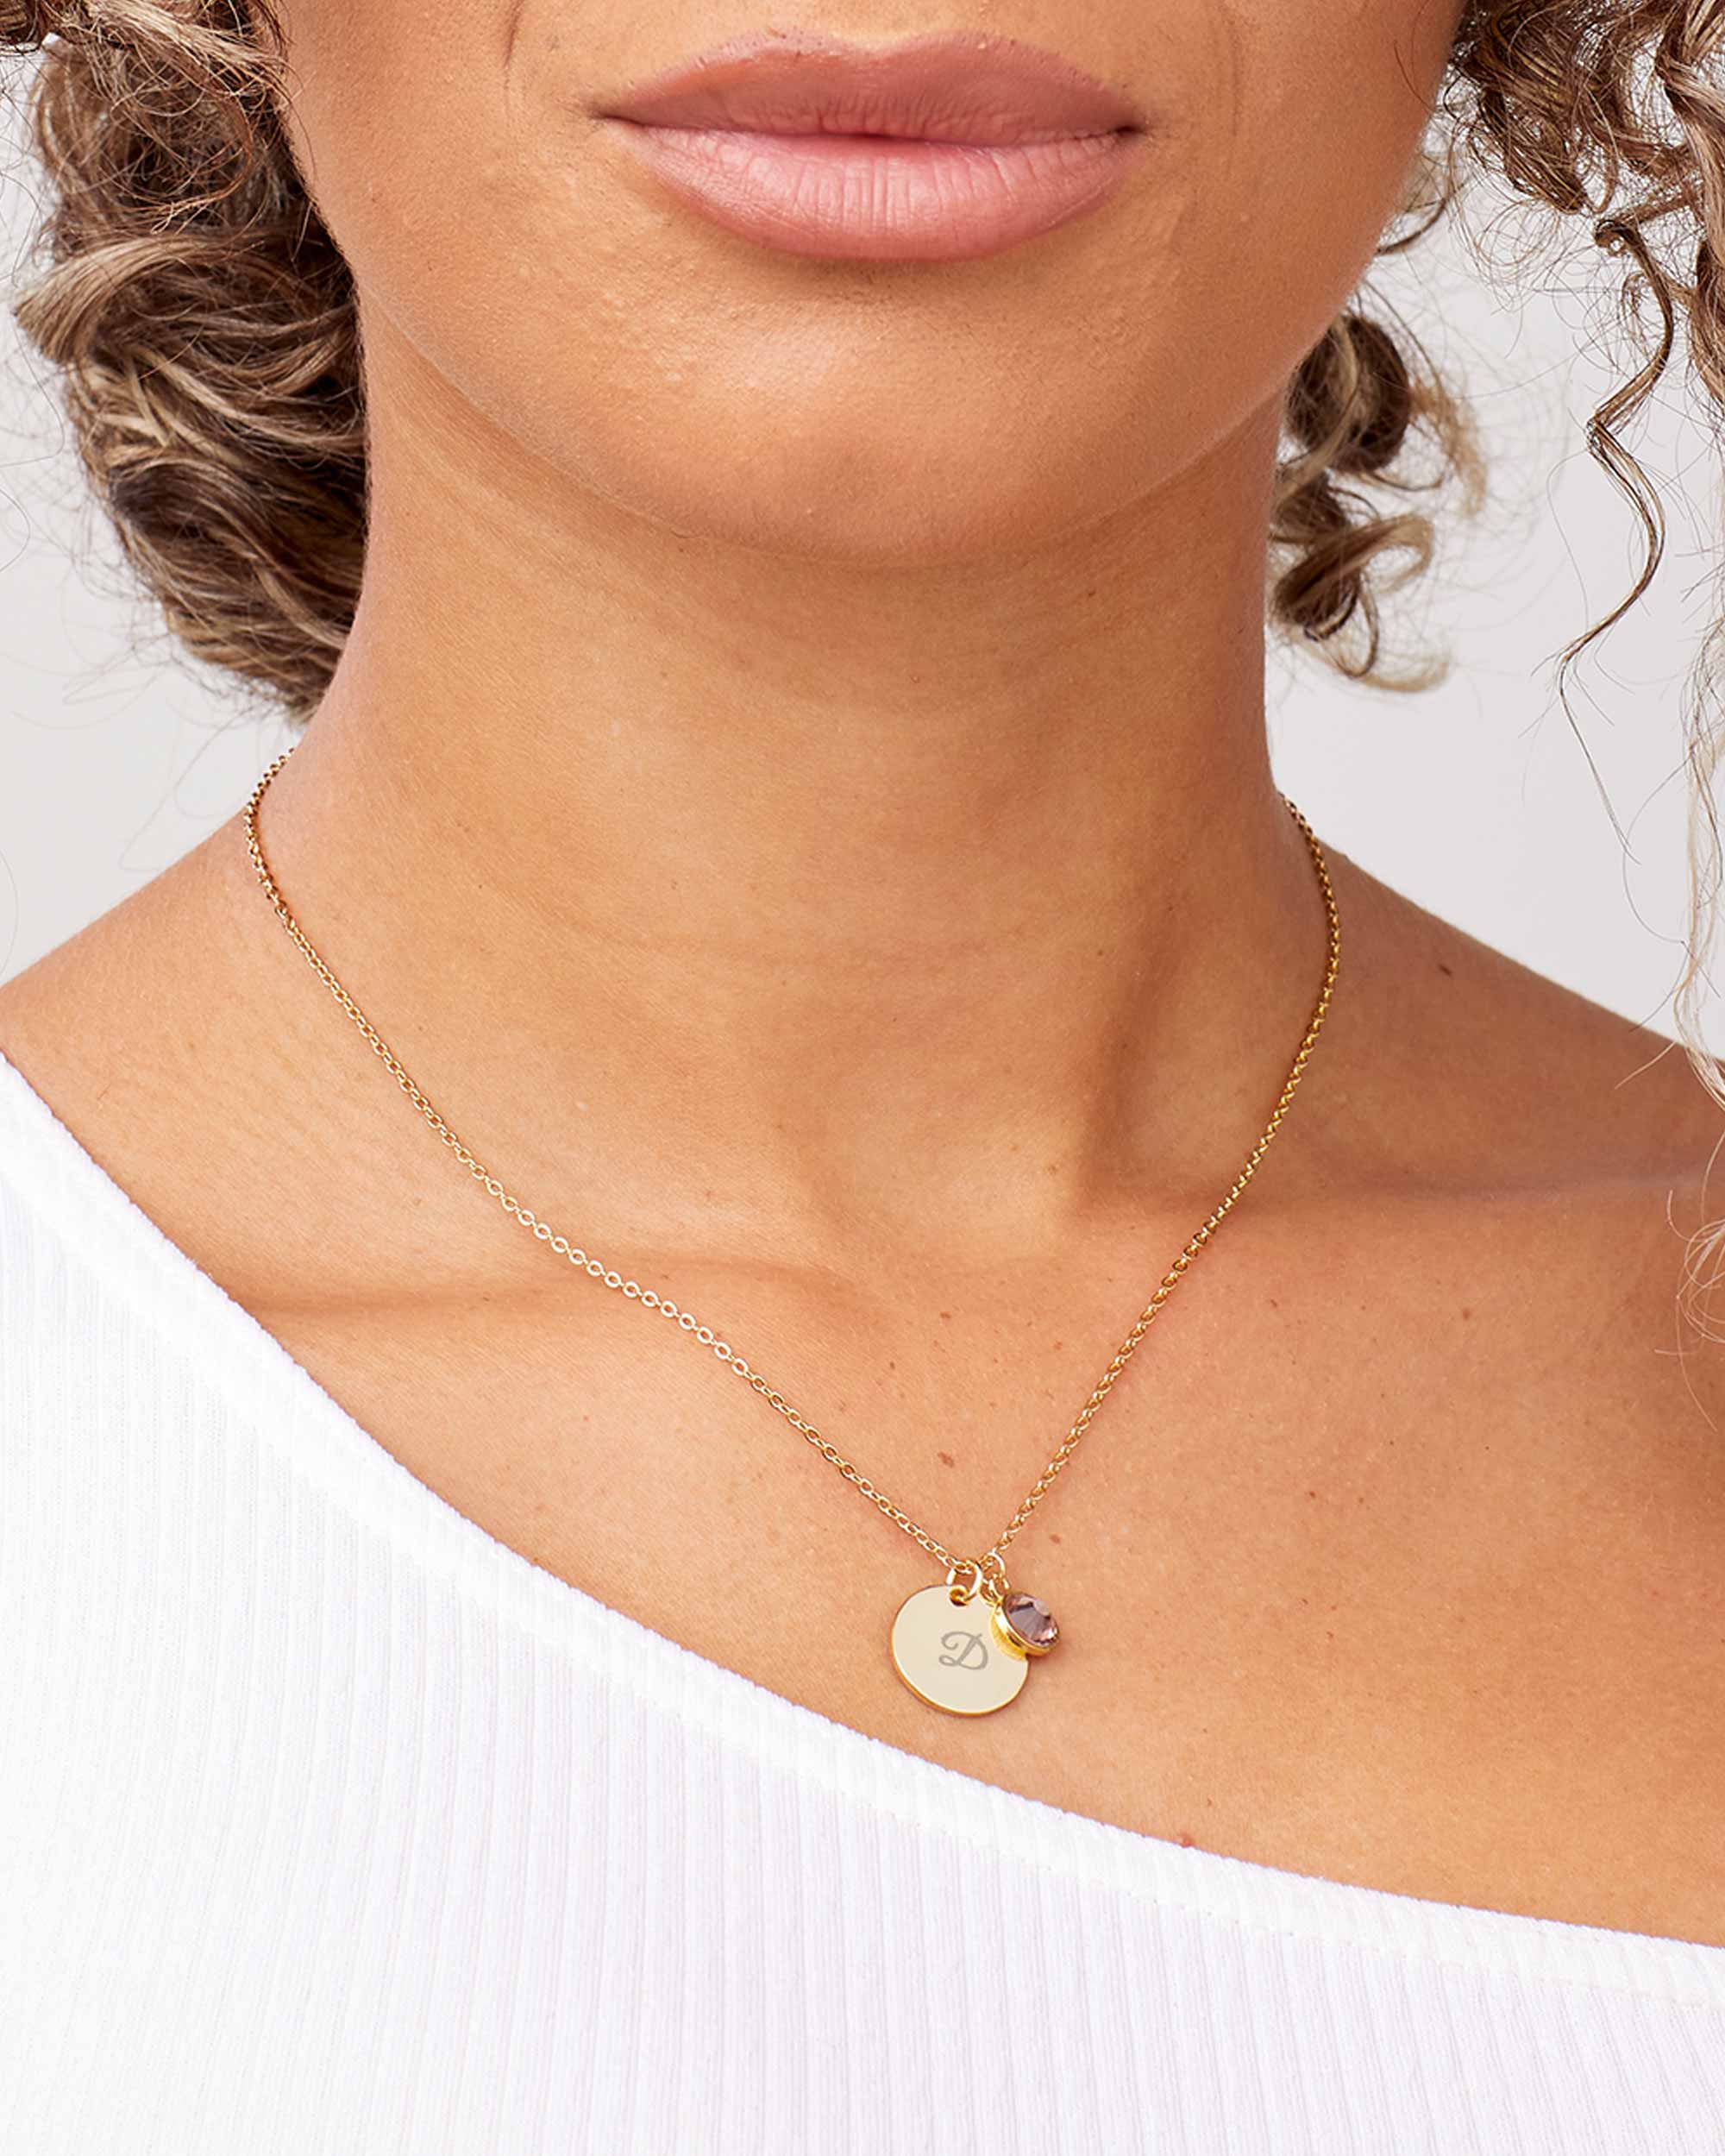 Gold Birthstone Engraved Initial Necklace